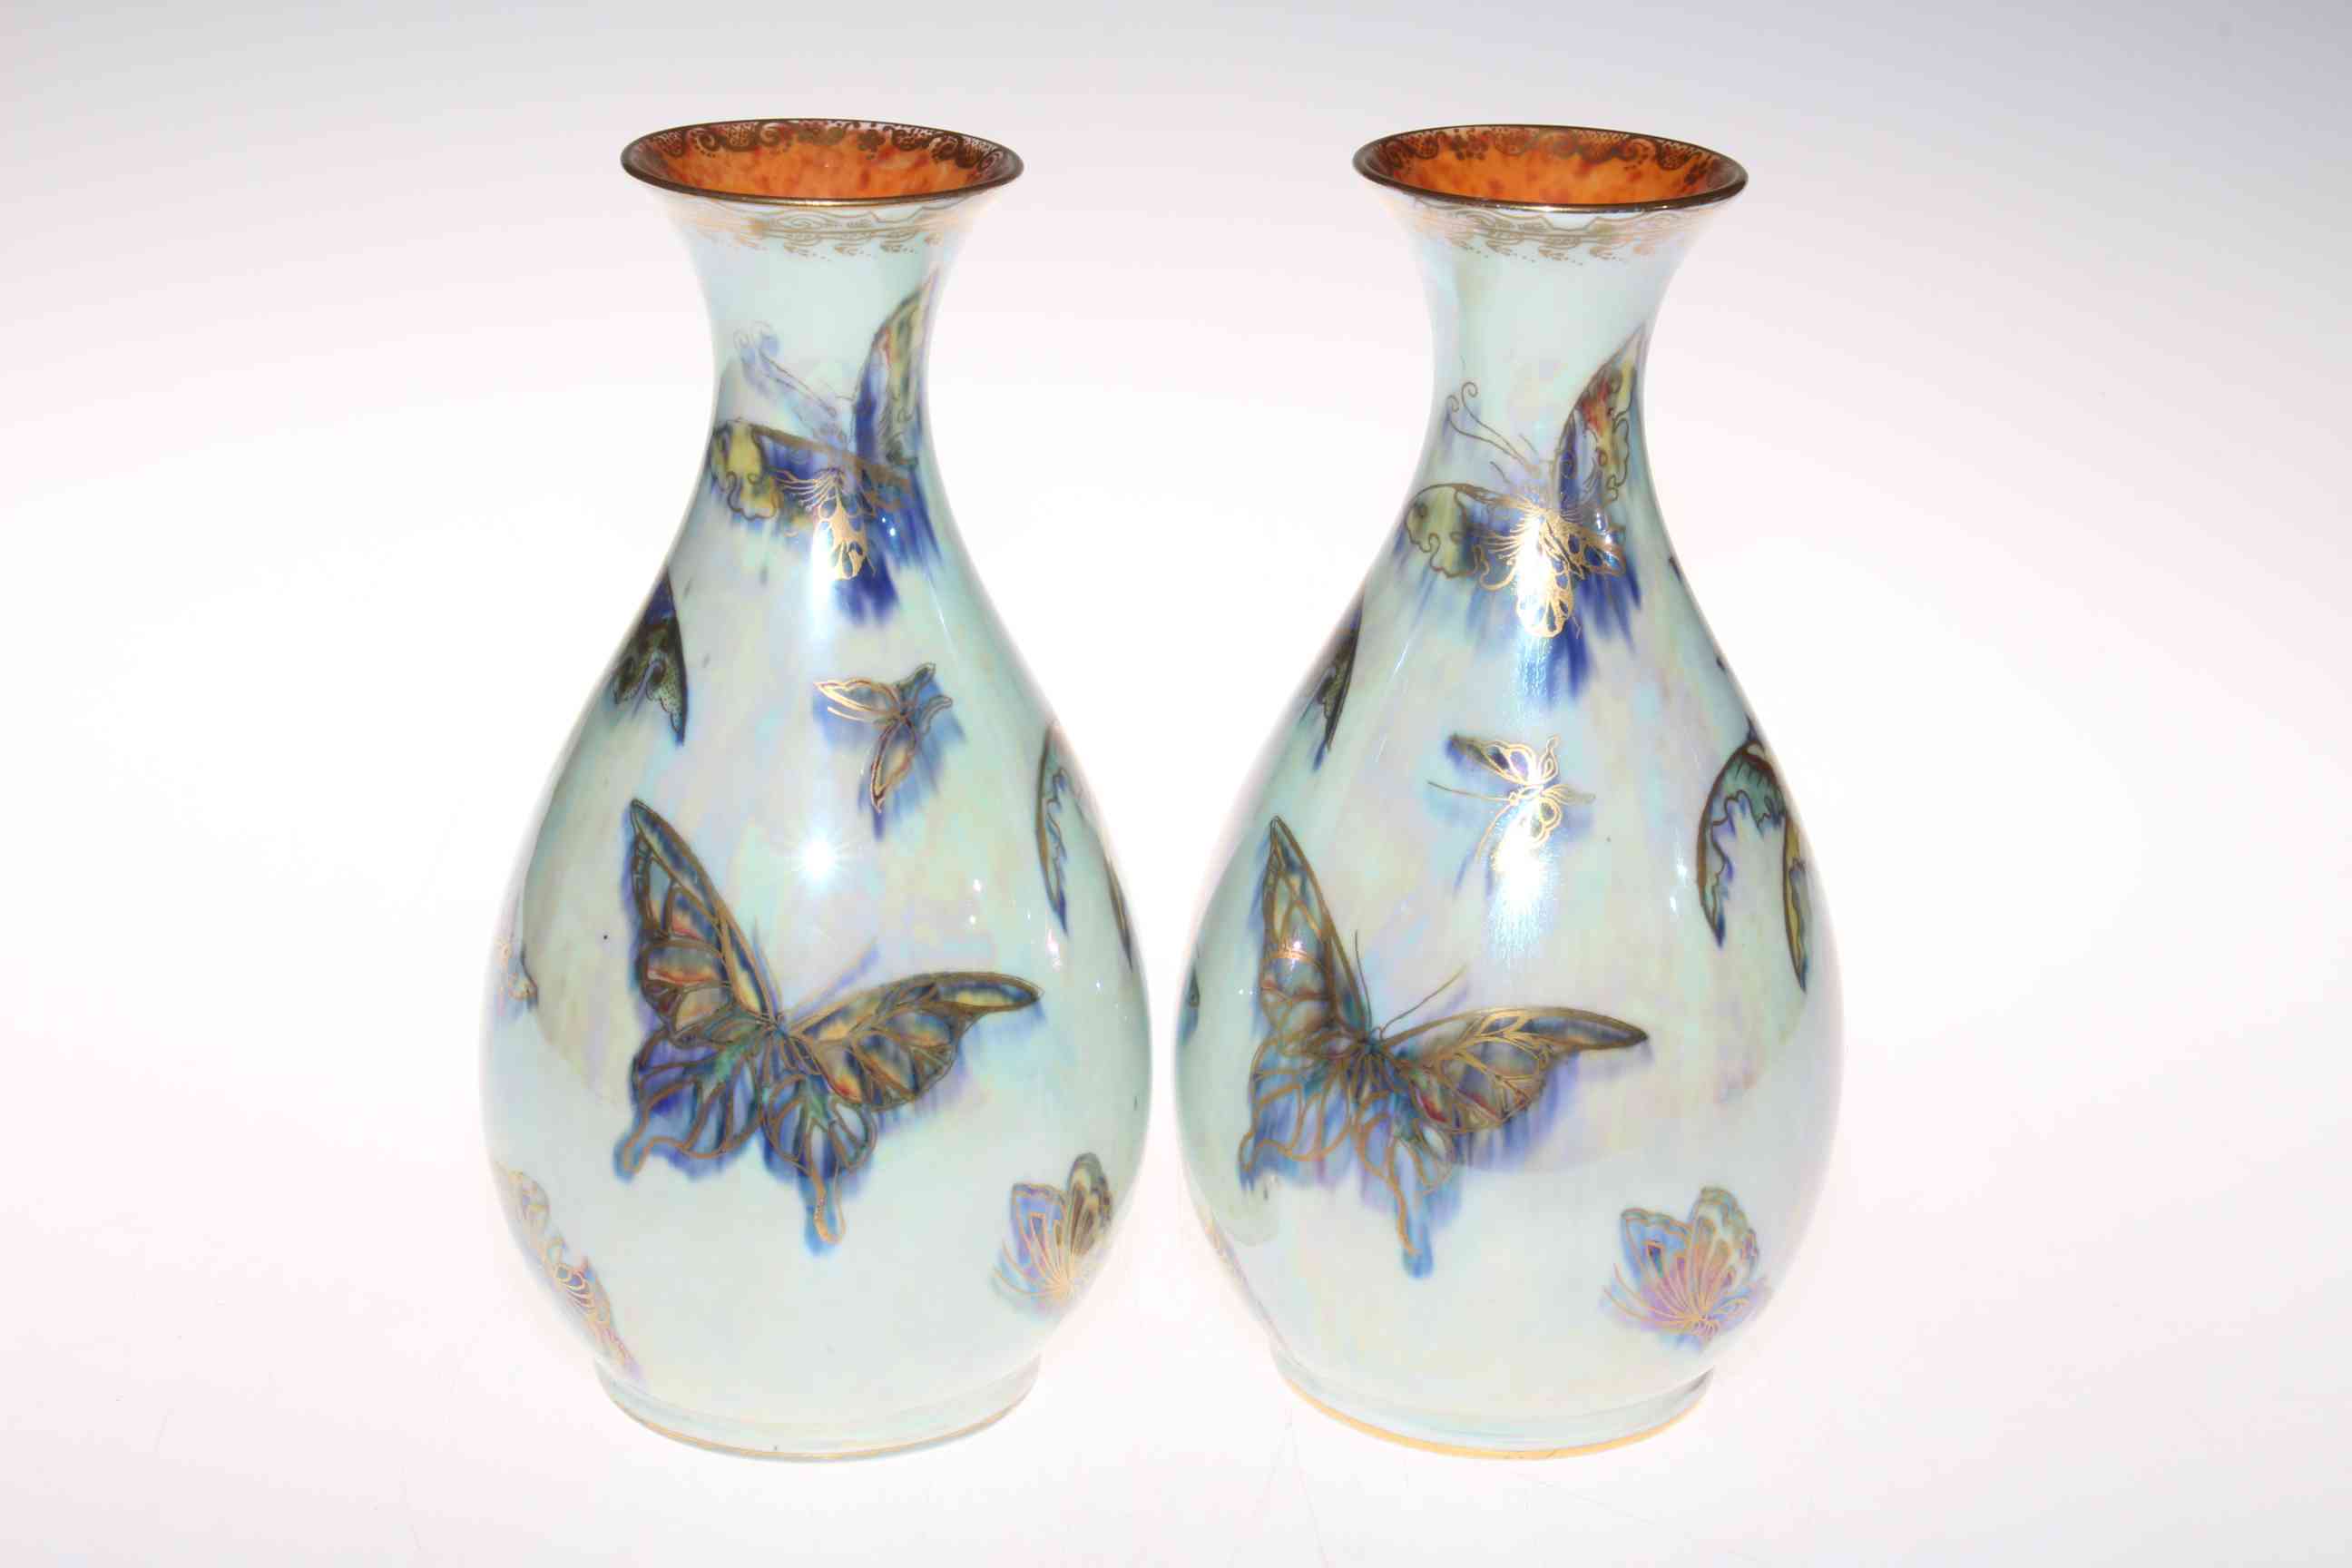 Pair of Wedgwood lustre vases decorated with butterflies, no. 4832, 23cm.